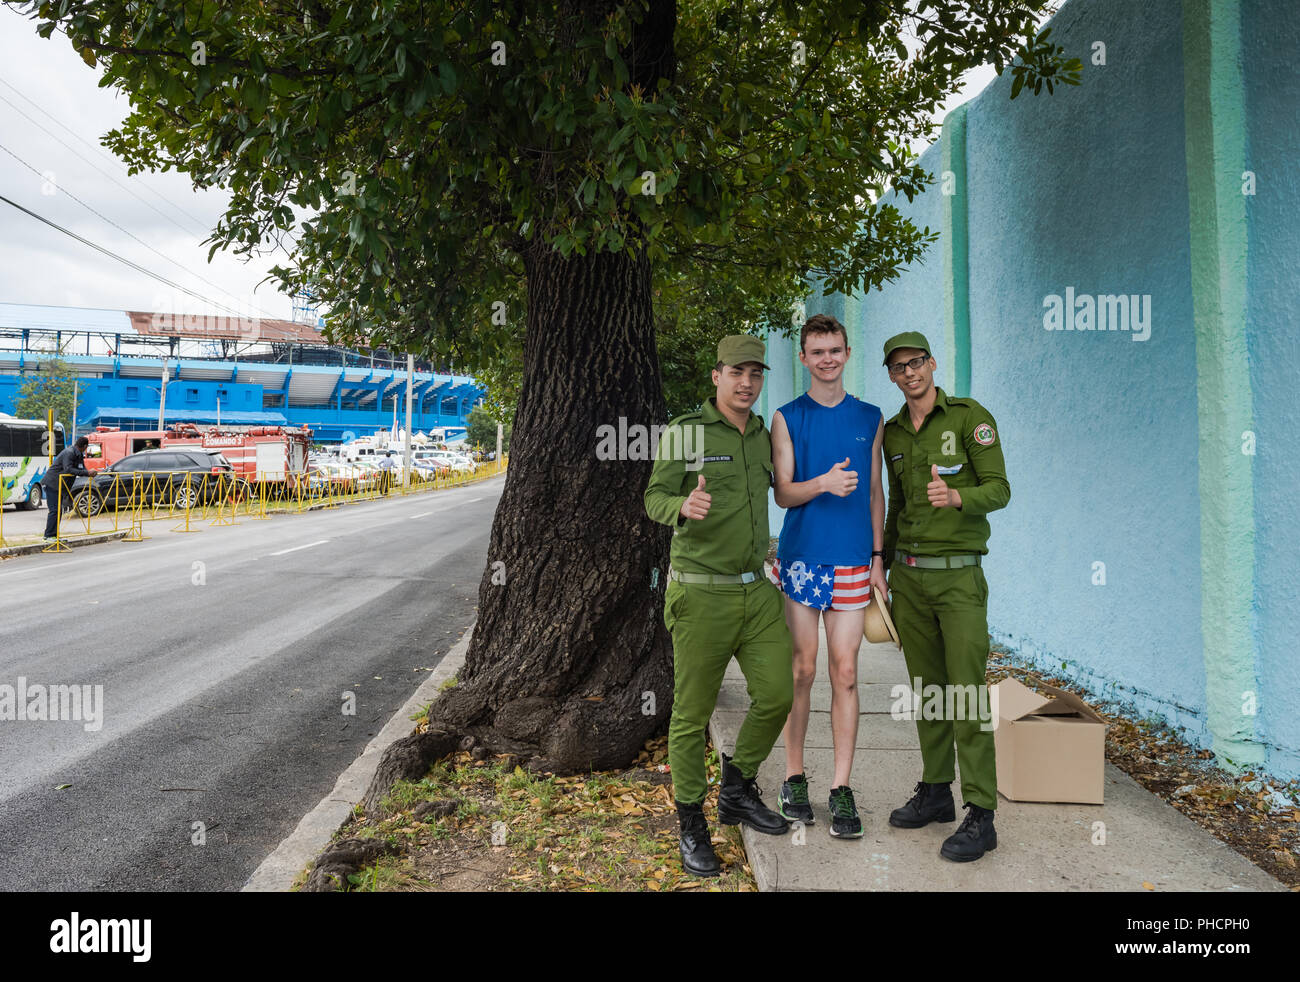 Havana, Cuba / March 22, 2016: American tourist, dressed in patriotic shorts, gives a thumbs up with two Cuban soldiers dressed in uniform fatigues on Stock Photo